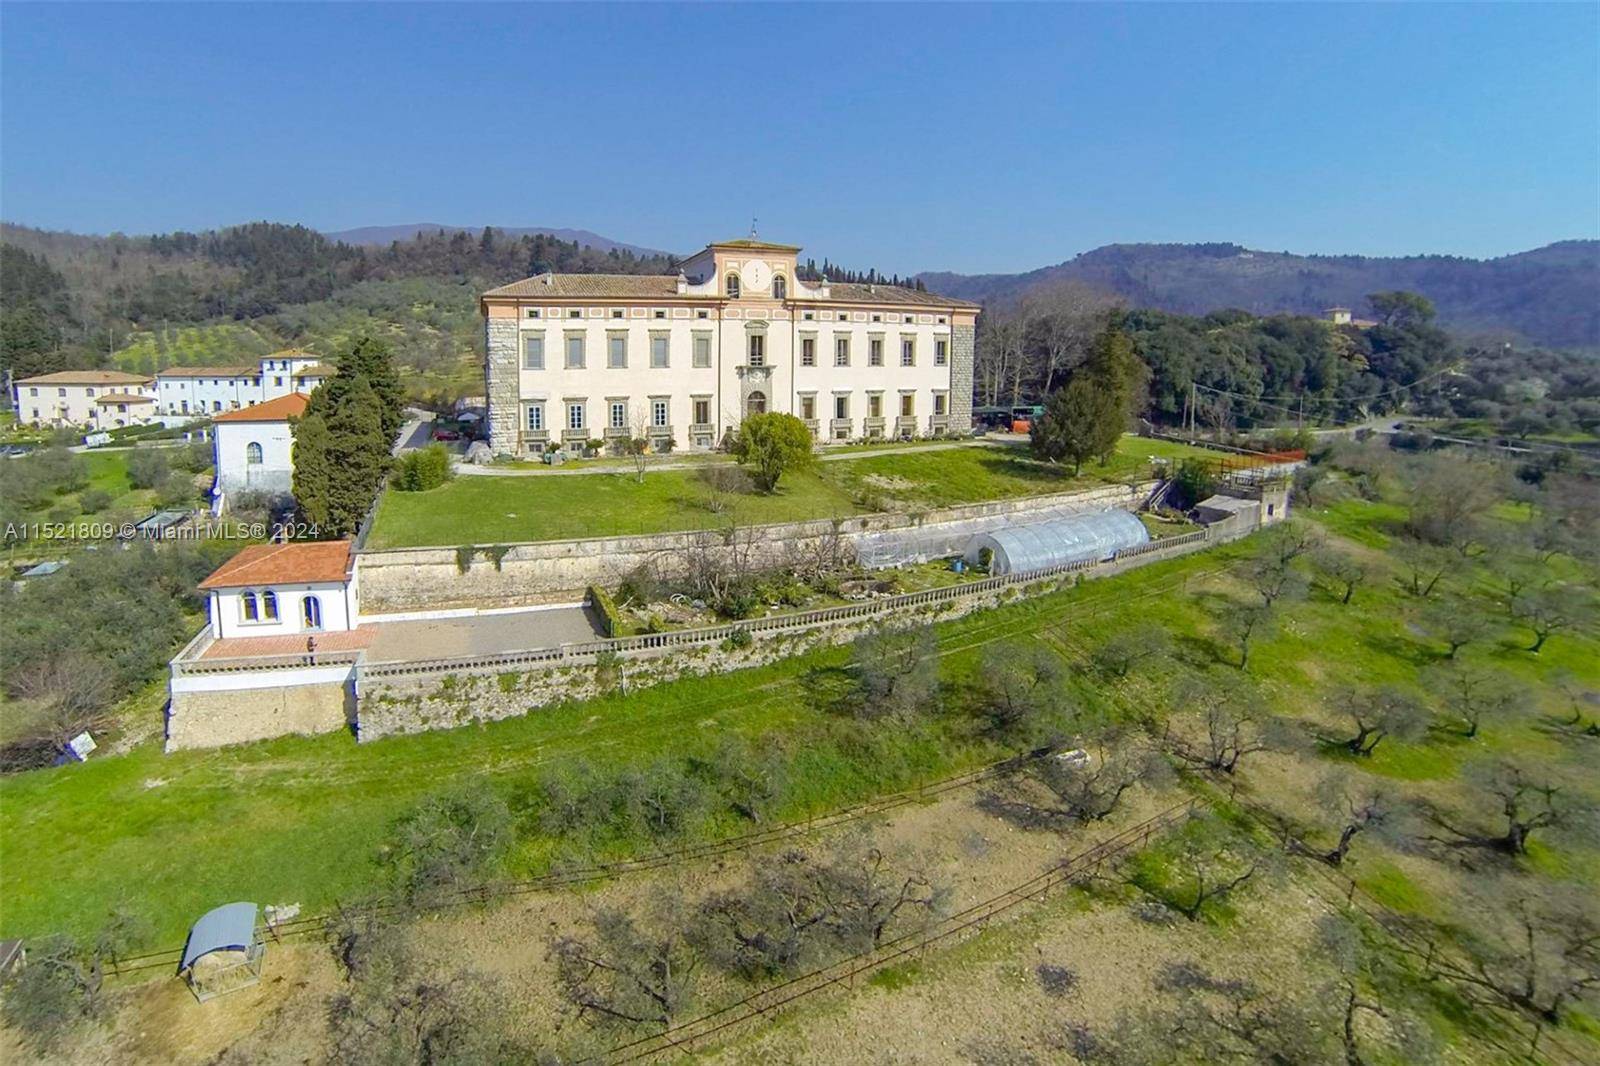 Exciting opportunity Historic villa near Florence, dating back to the 16th century, approved for transformation into a luxury hotel.